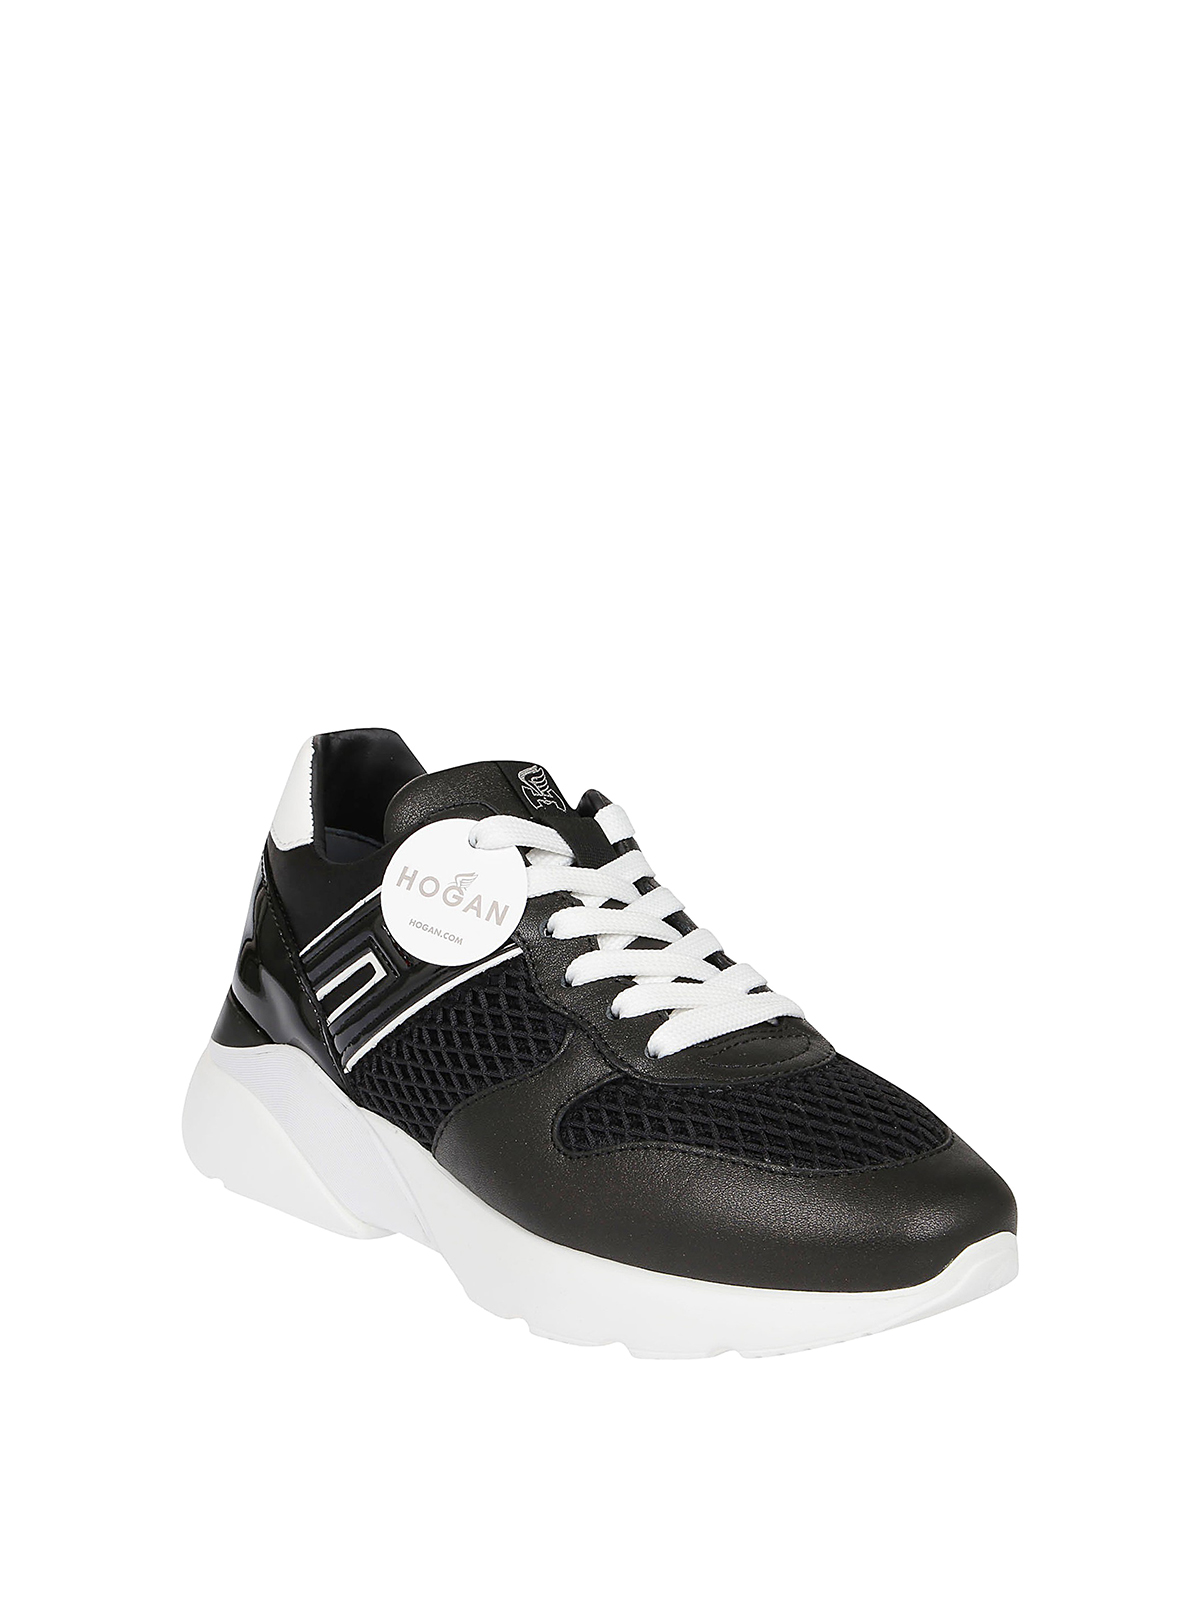 Hogan - Active One sneakers - trainers - HXW3850BF50N1I0002 | iKRIX.com